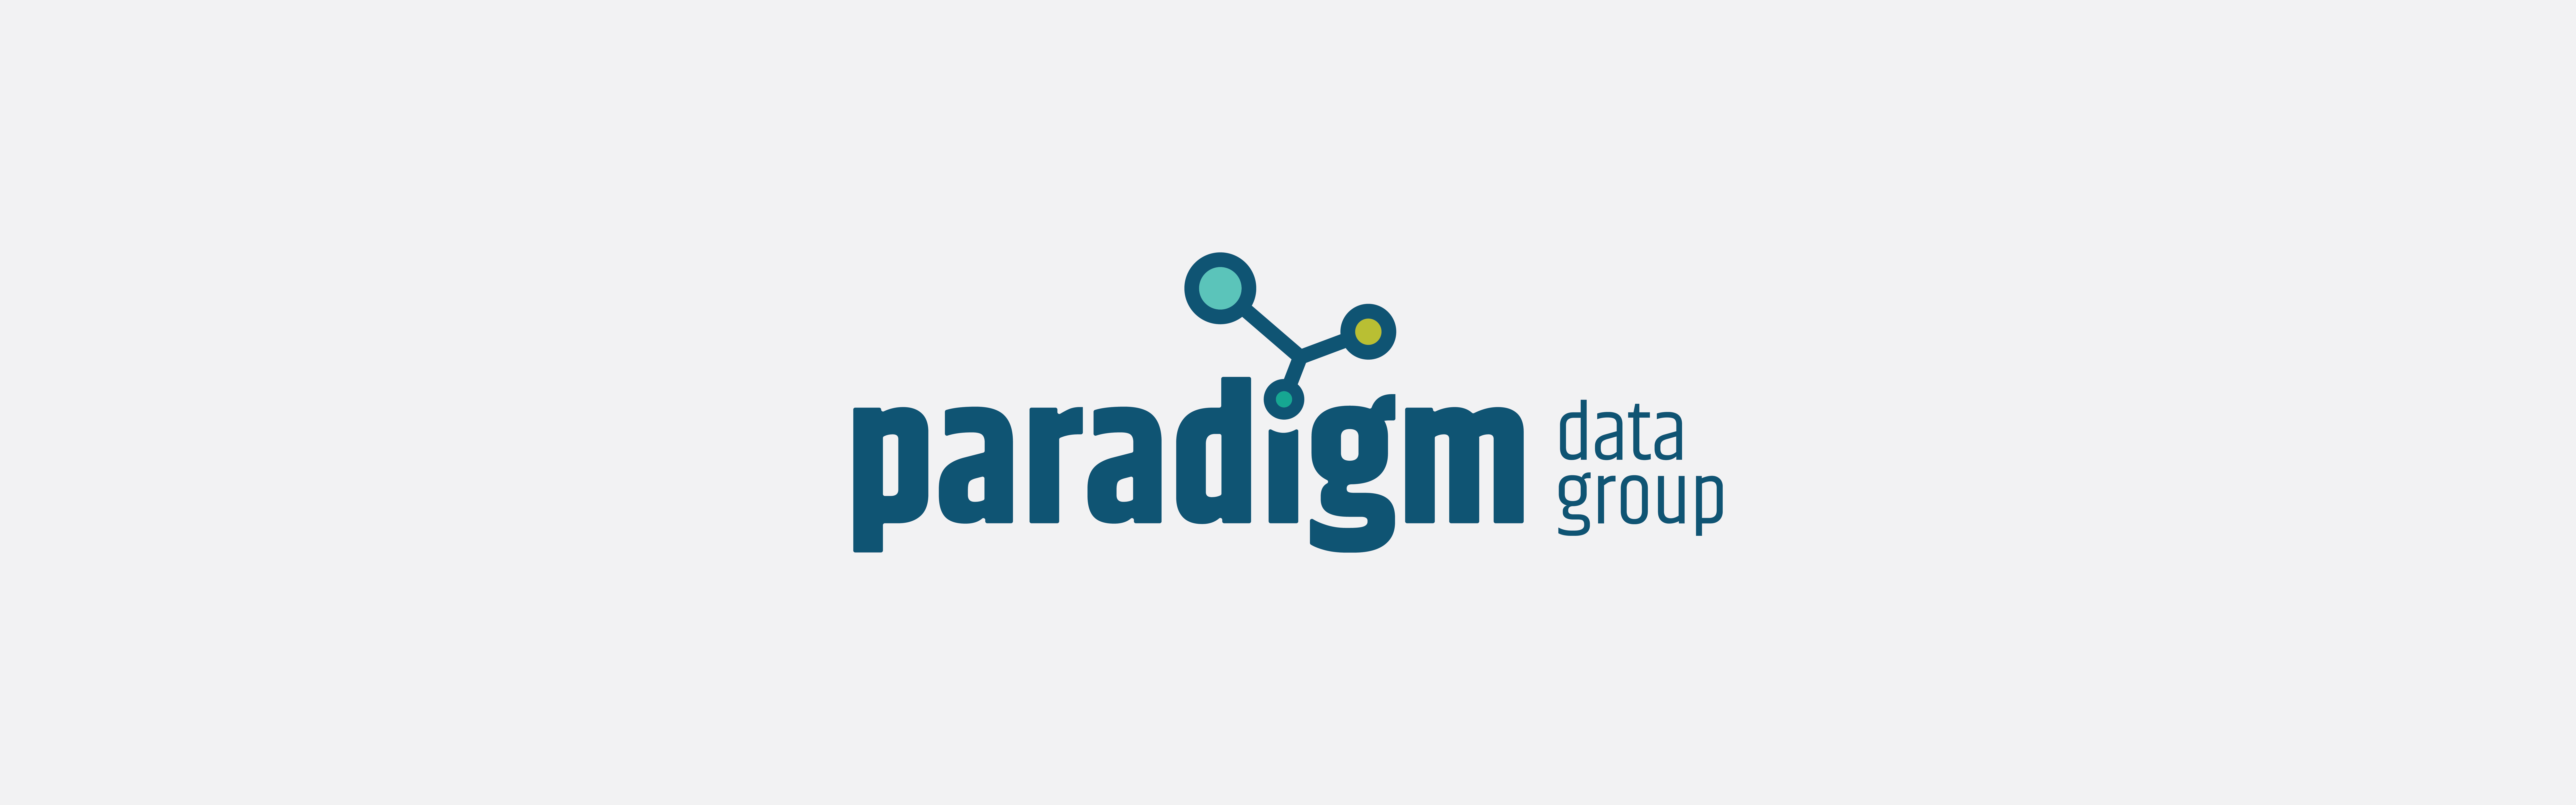 The image displays a logo consisting of the word 'Paradigm' in lowercase letters with a graphic resembling a network or molecular structure above the letter 'i', followed by the words 'Data Group'.